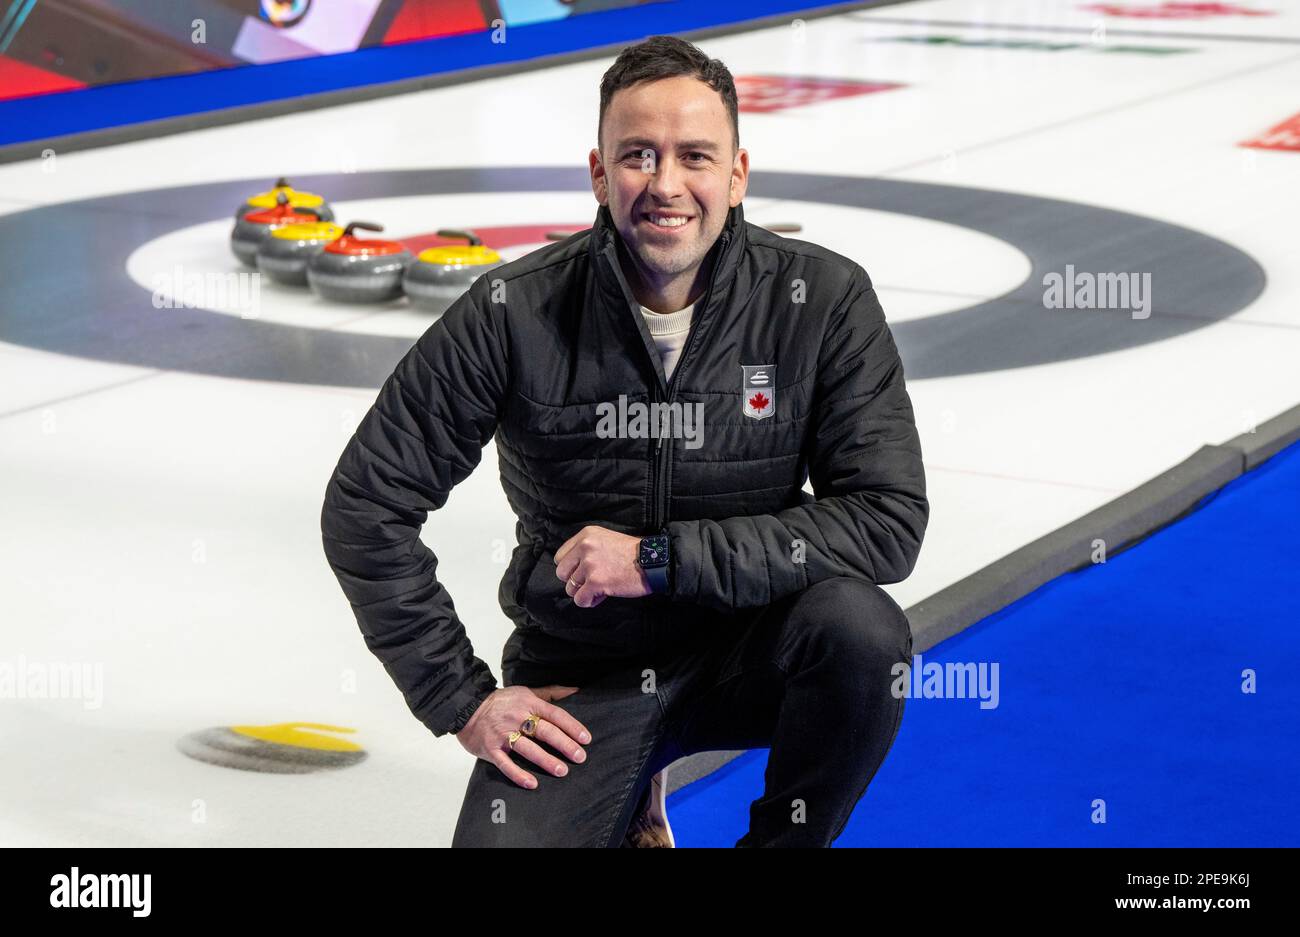 Curling Canada high performance director David Murdoch poses for a photo at the 2023 Tim Hortons Brier in London, Ontario on Friday March 10, 2023